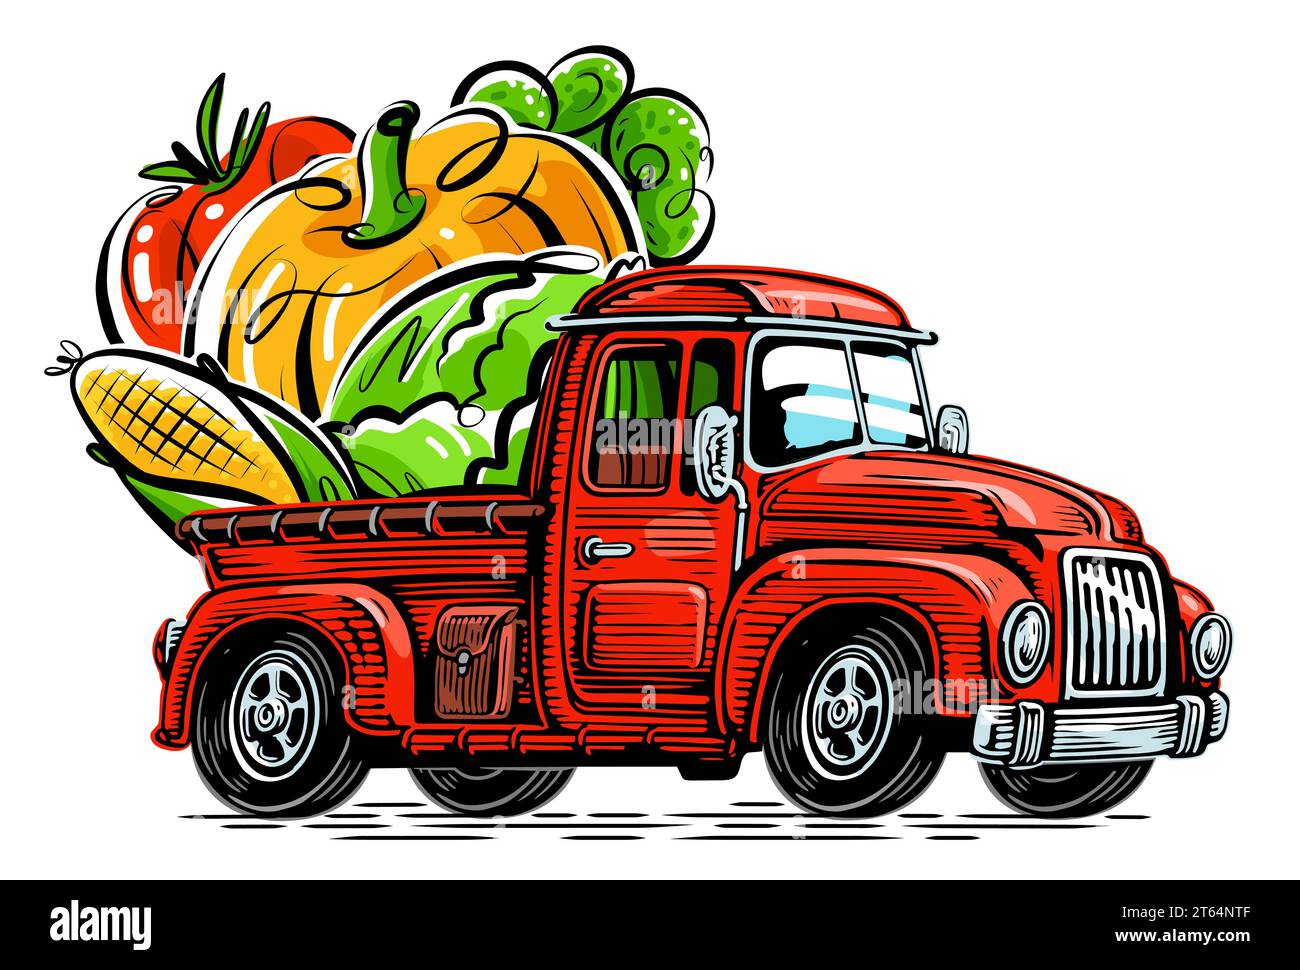 Farmer rides in a truck loaded with organic food. Farm vector illustration Stock Vector